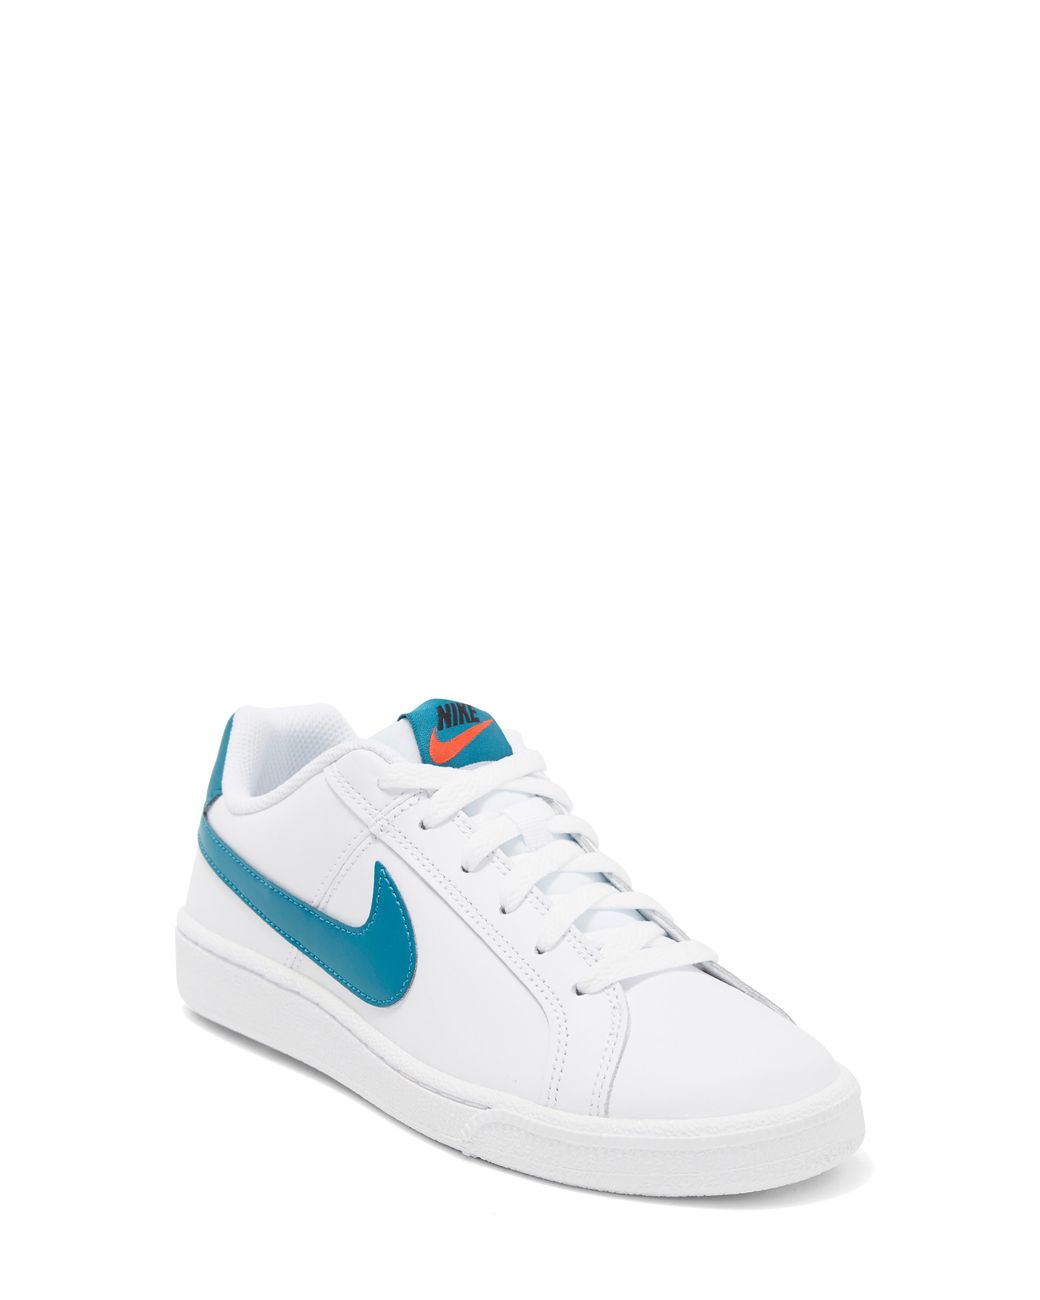 Nike Court Royale Leather Sneaker in White | Lyst